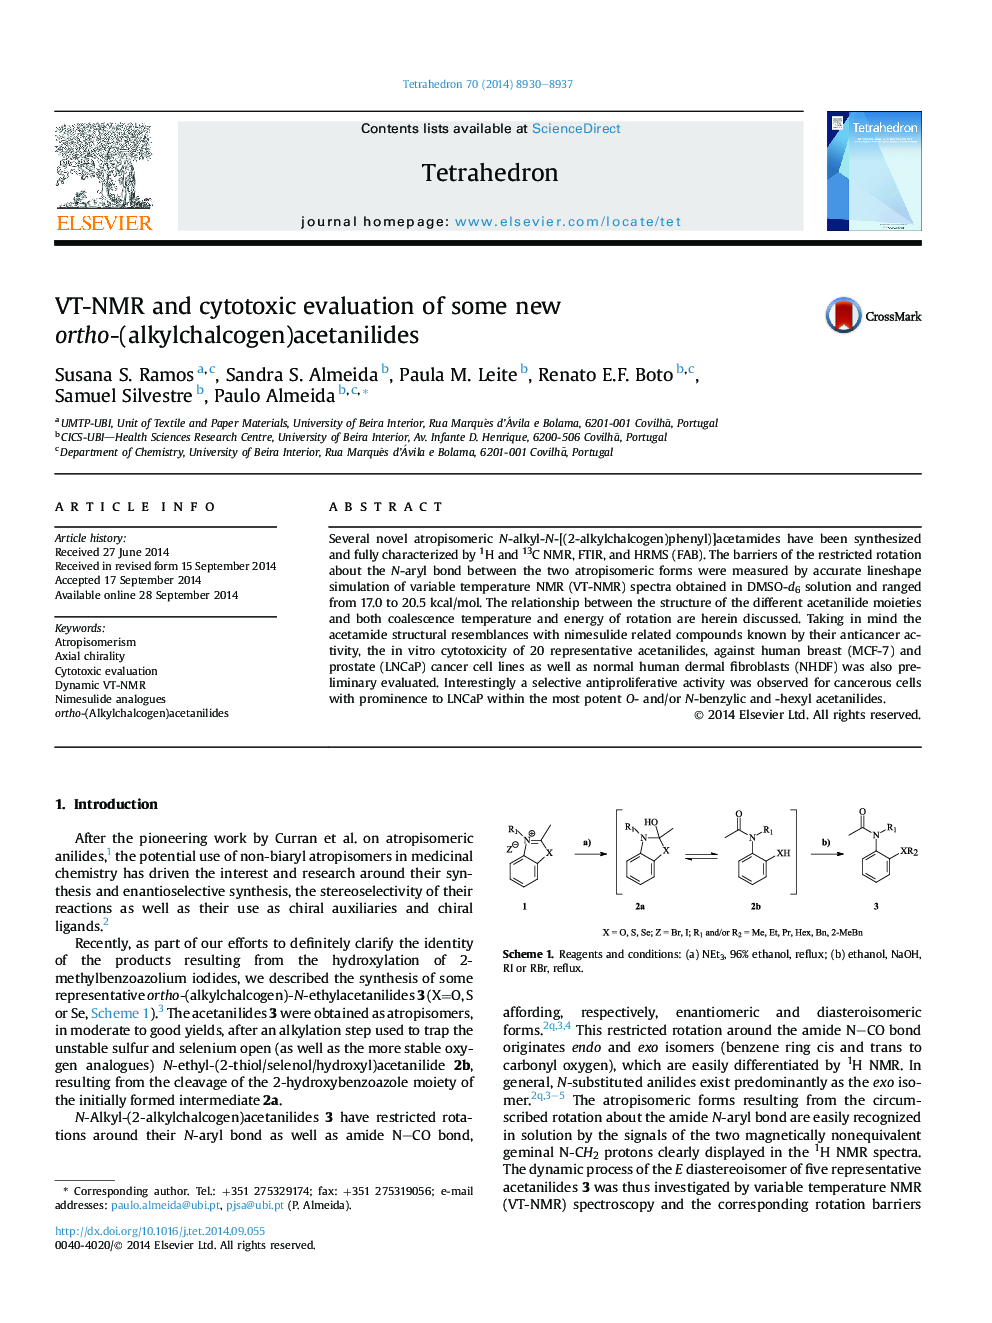 VT-NMR and cytotoxic evaluation of some new ortho-(alkylchalcogen)acetanilides